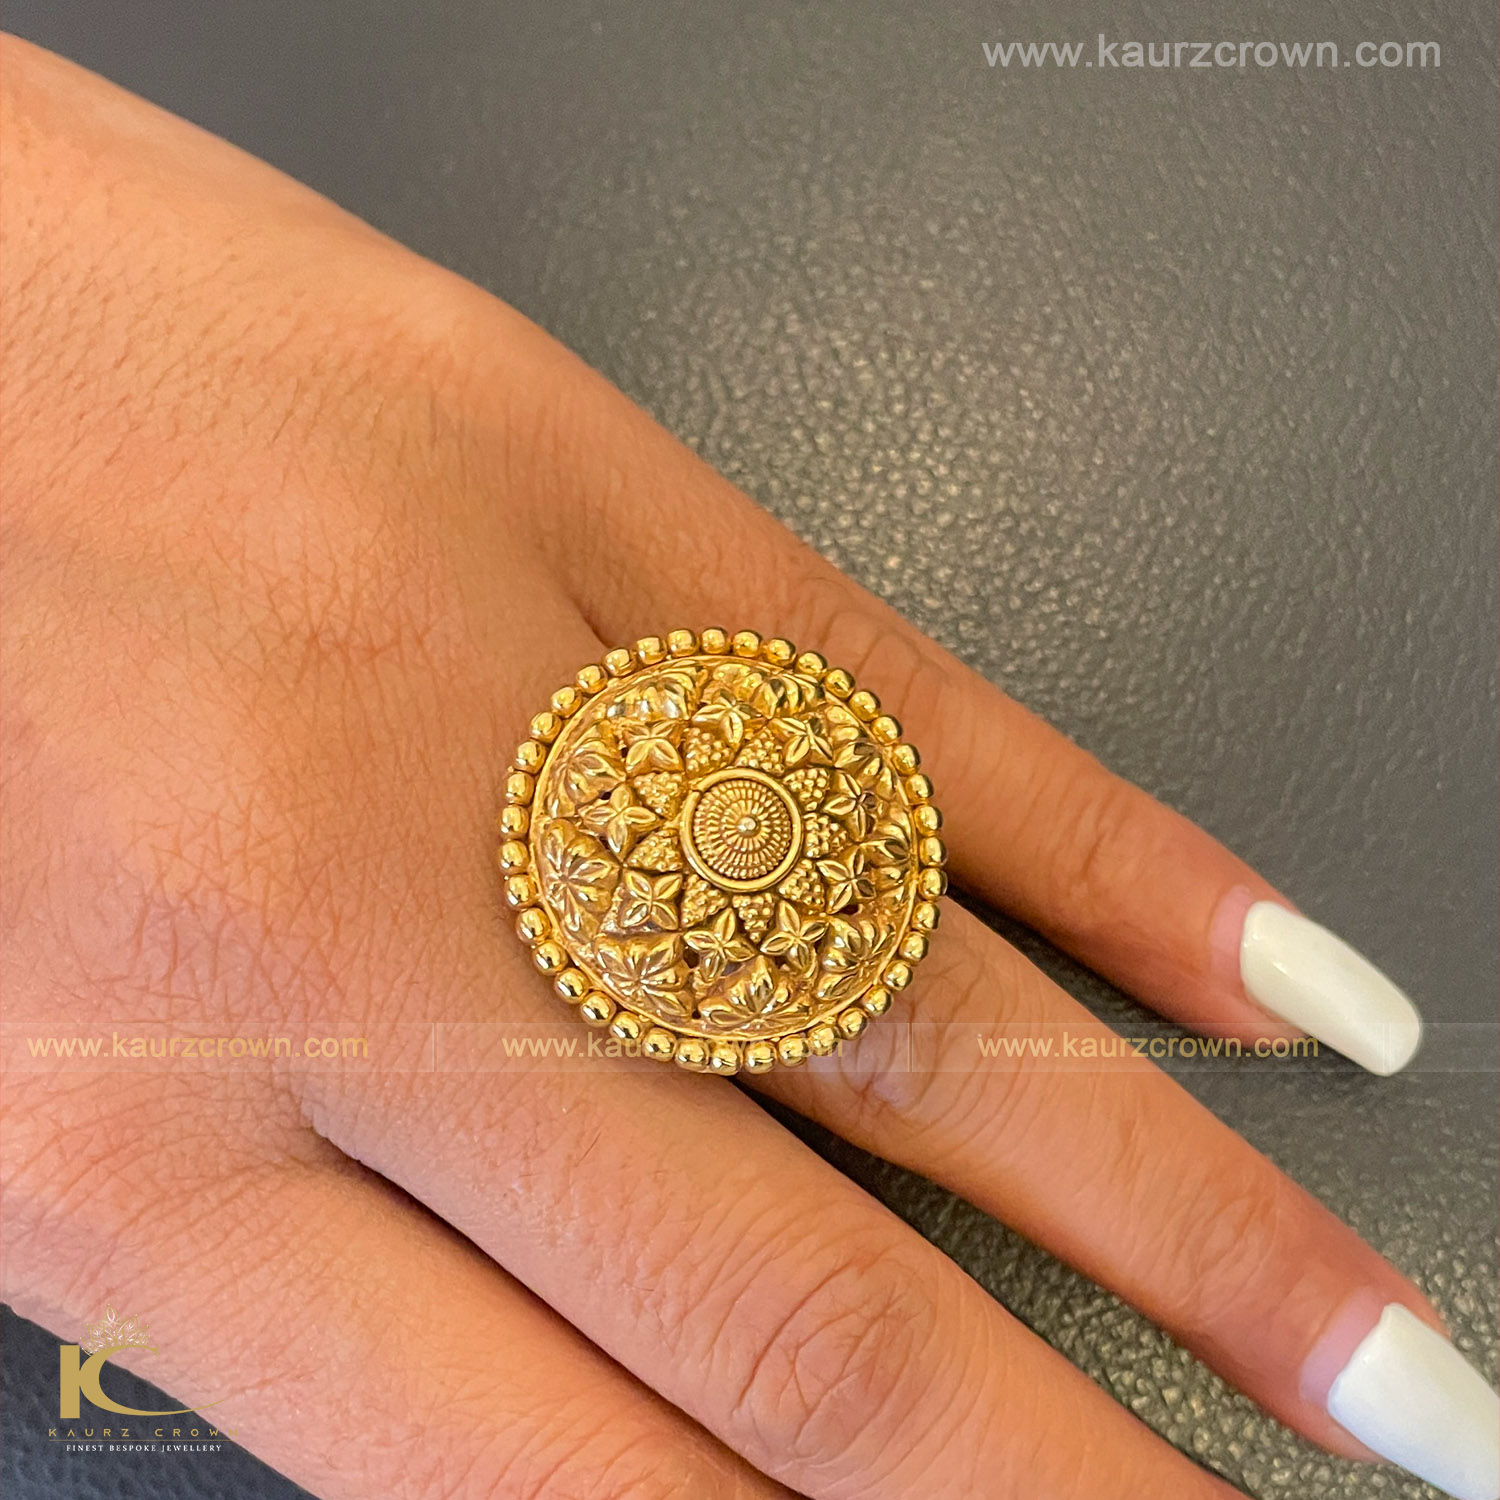 YouTube | Gold ring designs, Gold rings fashion, Ring designs